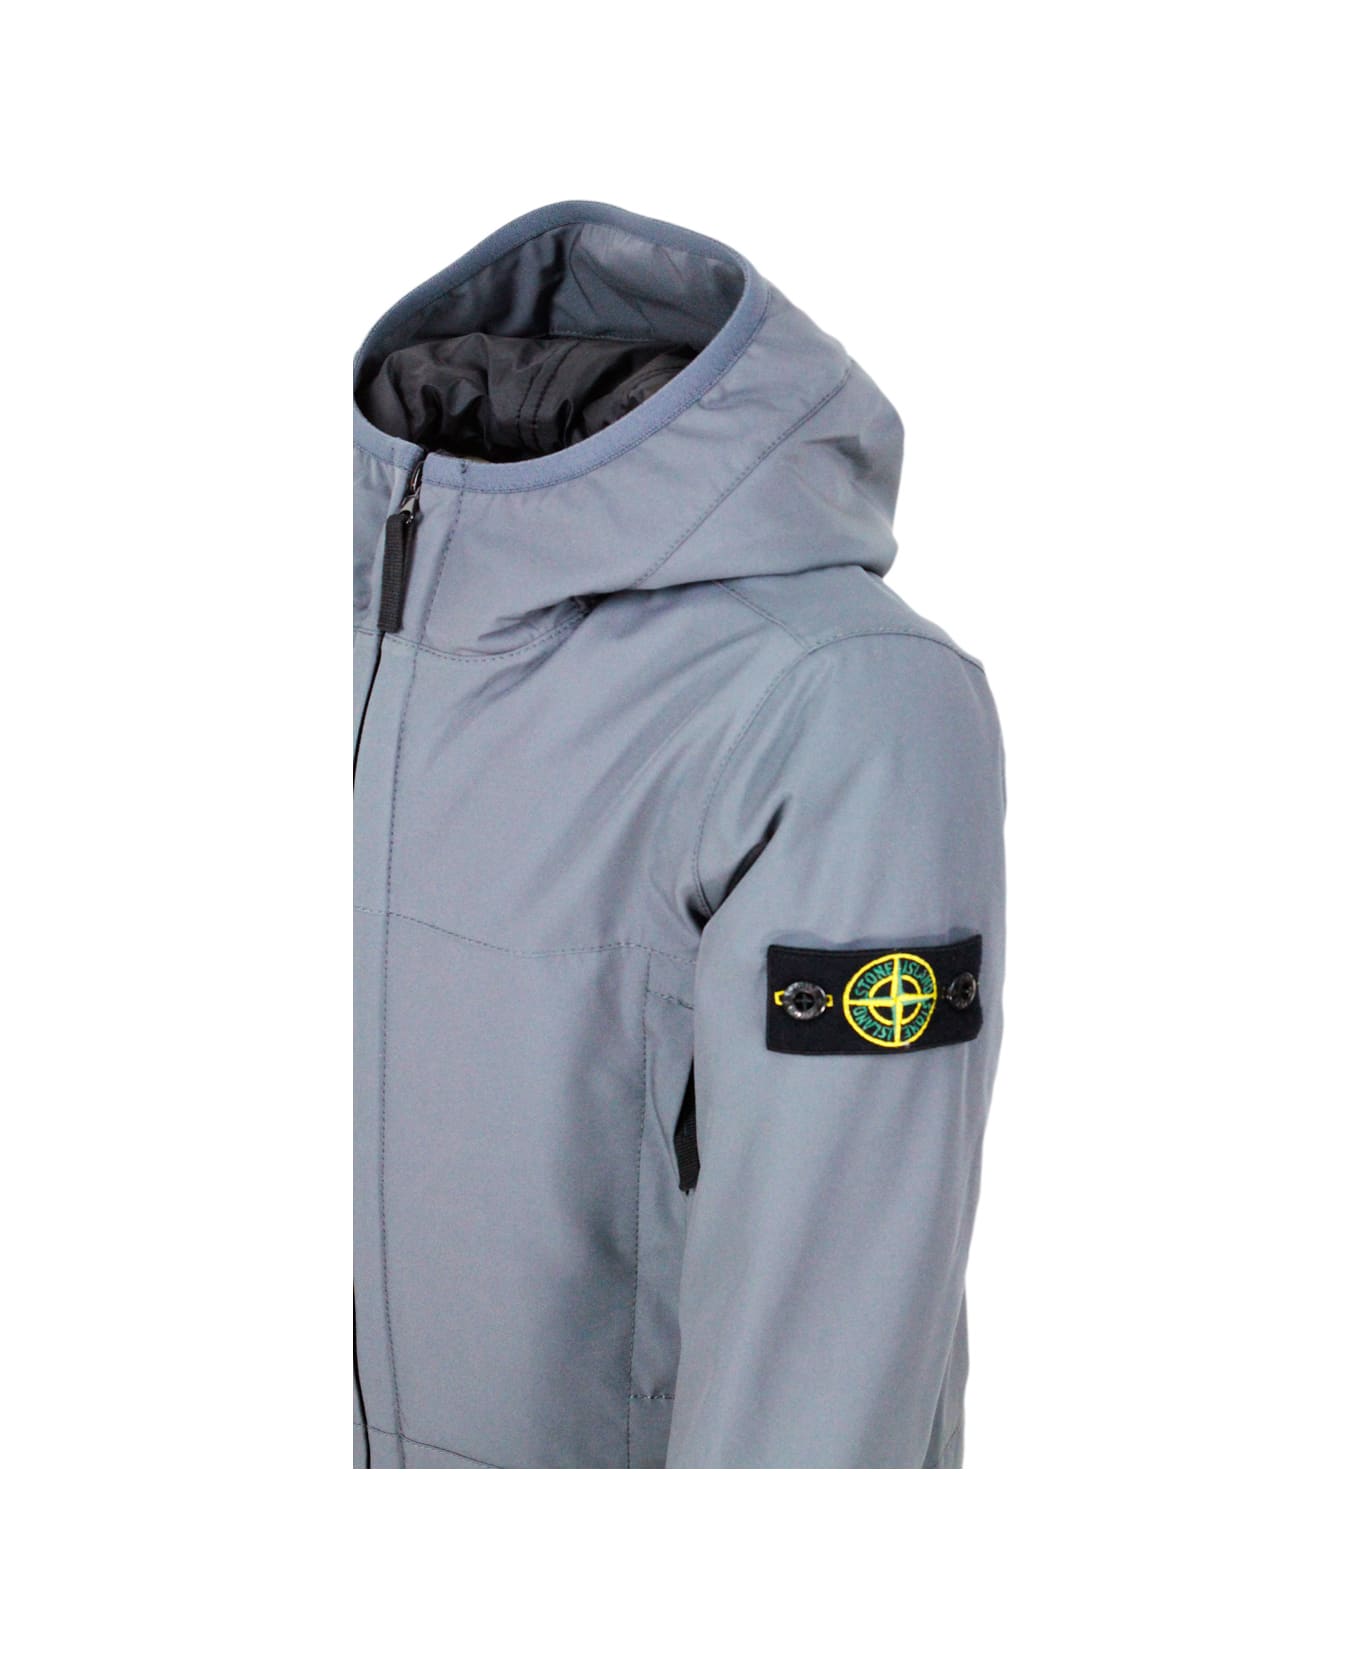 Stone Island Padded Jacket With Hood In Technical Fabric Made With Recycled Bottles E.dye Technology With Primaloft Insulation Technology - Grey コート＆ジャケット